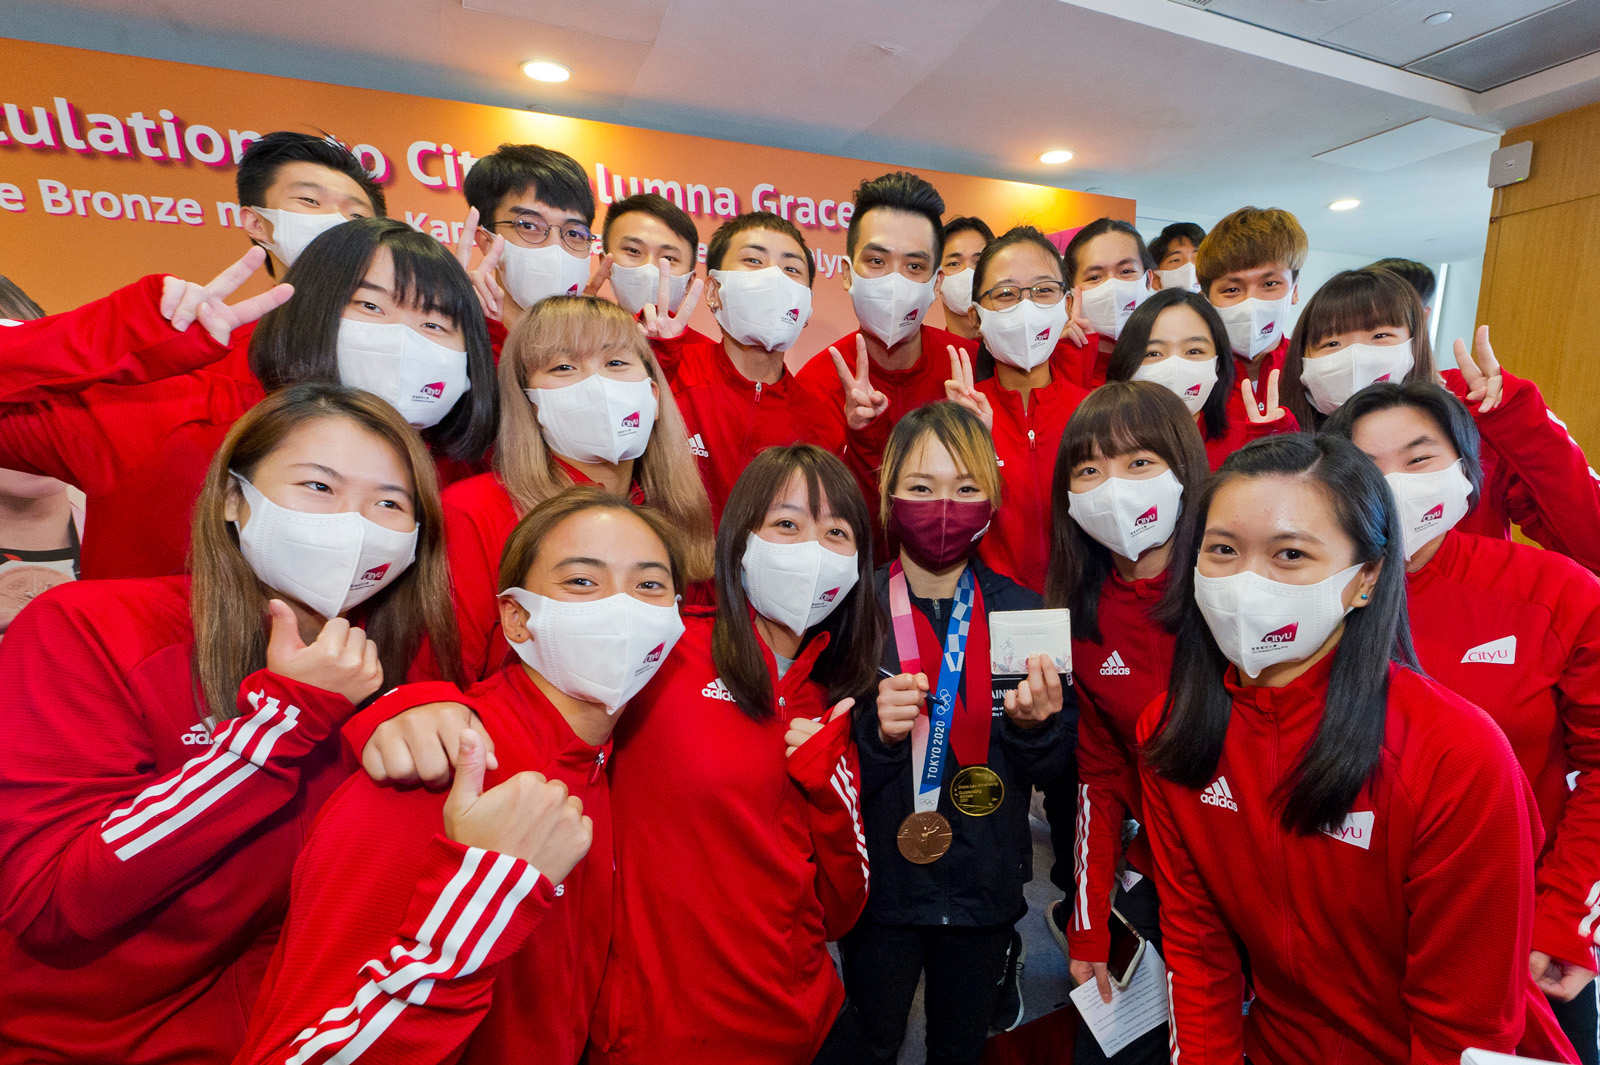 Grace Lau, Hong Kong’s bronze medalist at the 2020 Tokyo Olympics’ Karate Women’s Kata, returned to her alma mater in August to attend a celebratory gathering.